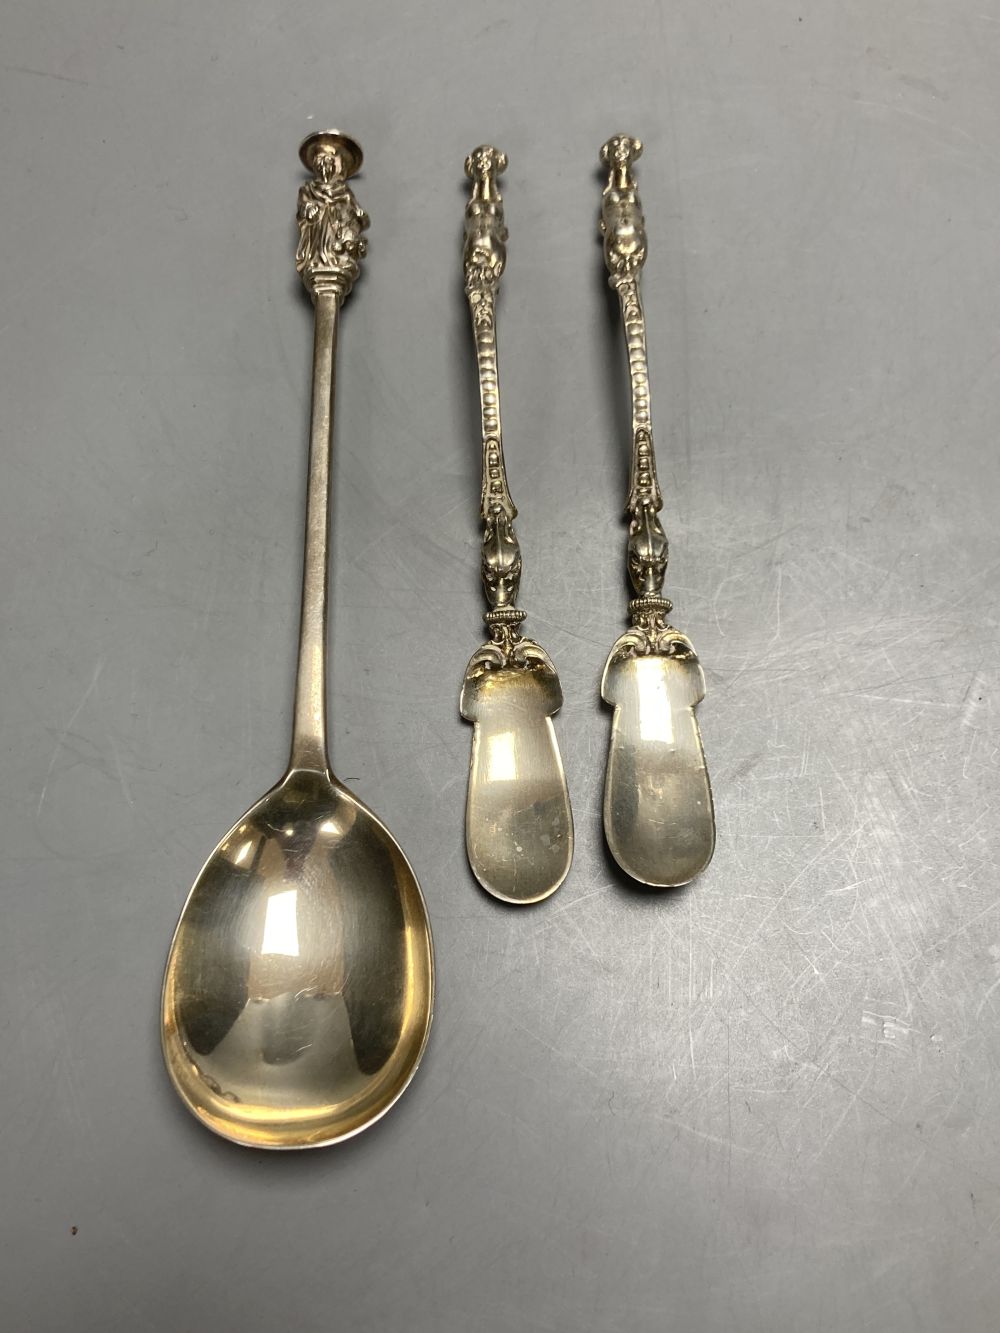 An Edwardian silver seal top spoon, London, 1905, 19.9cm and a pair of novelty plated spoons with figural handles.